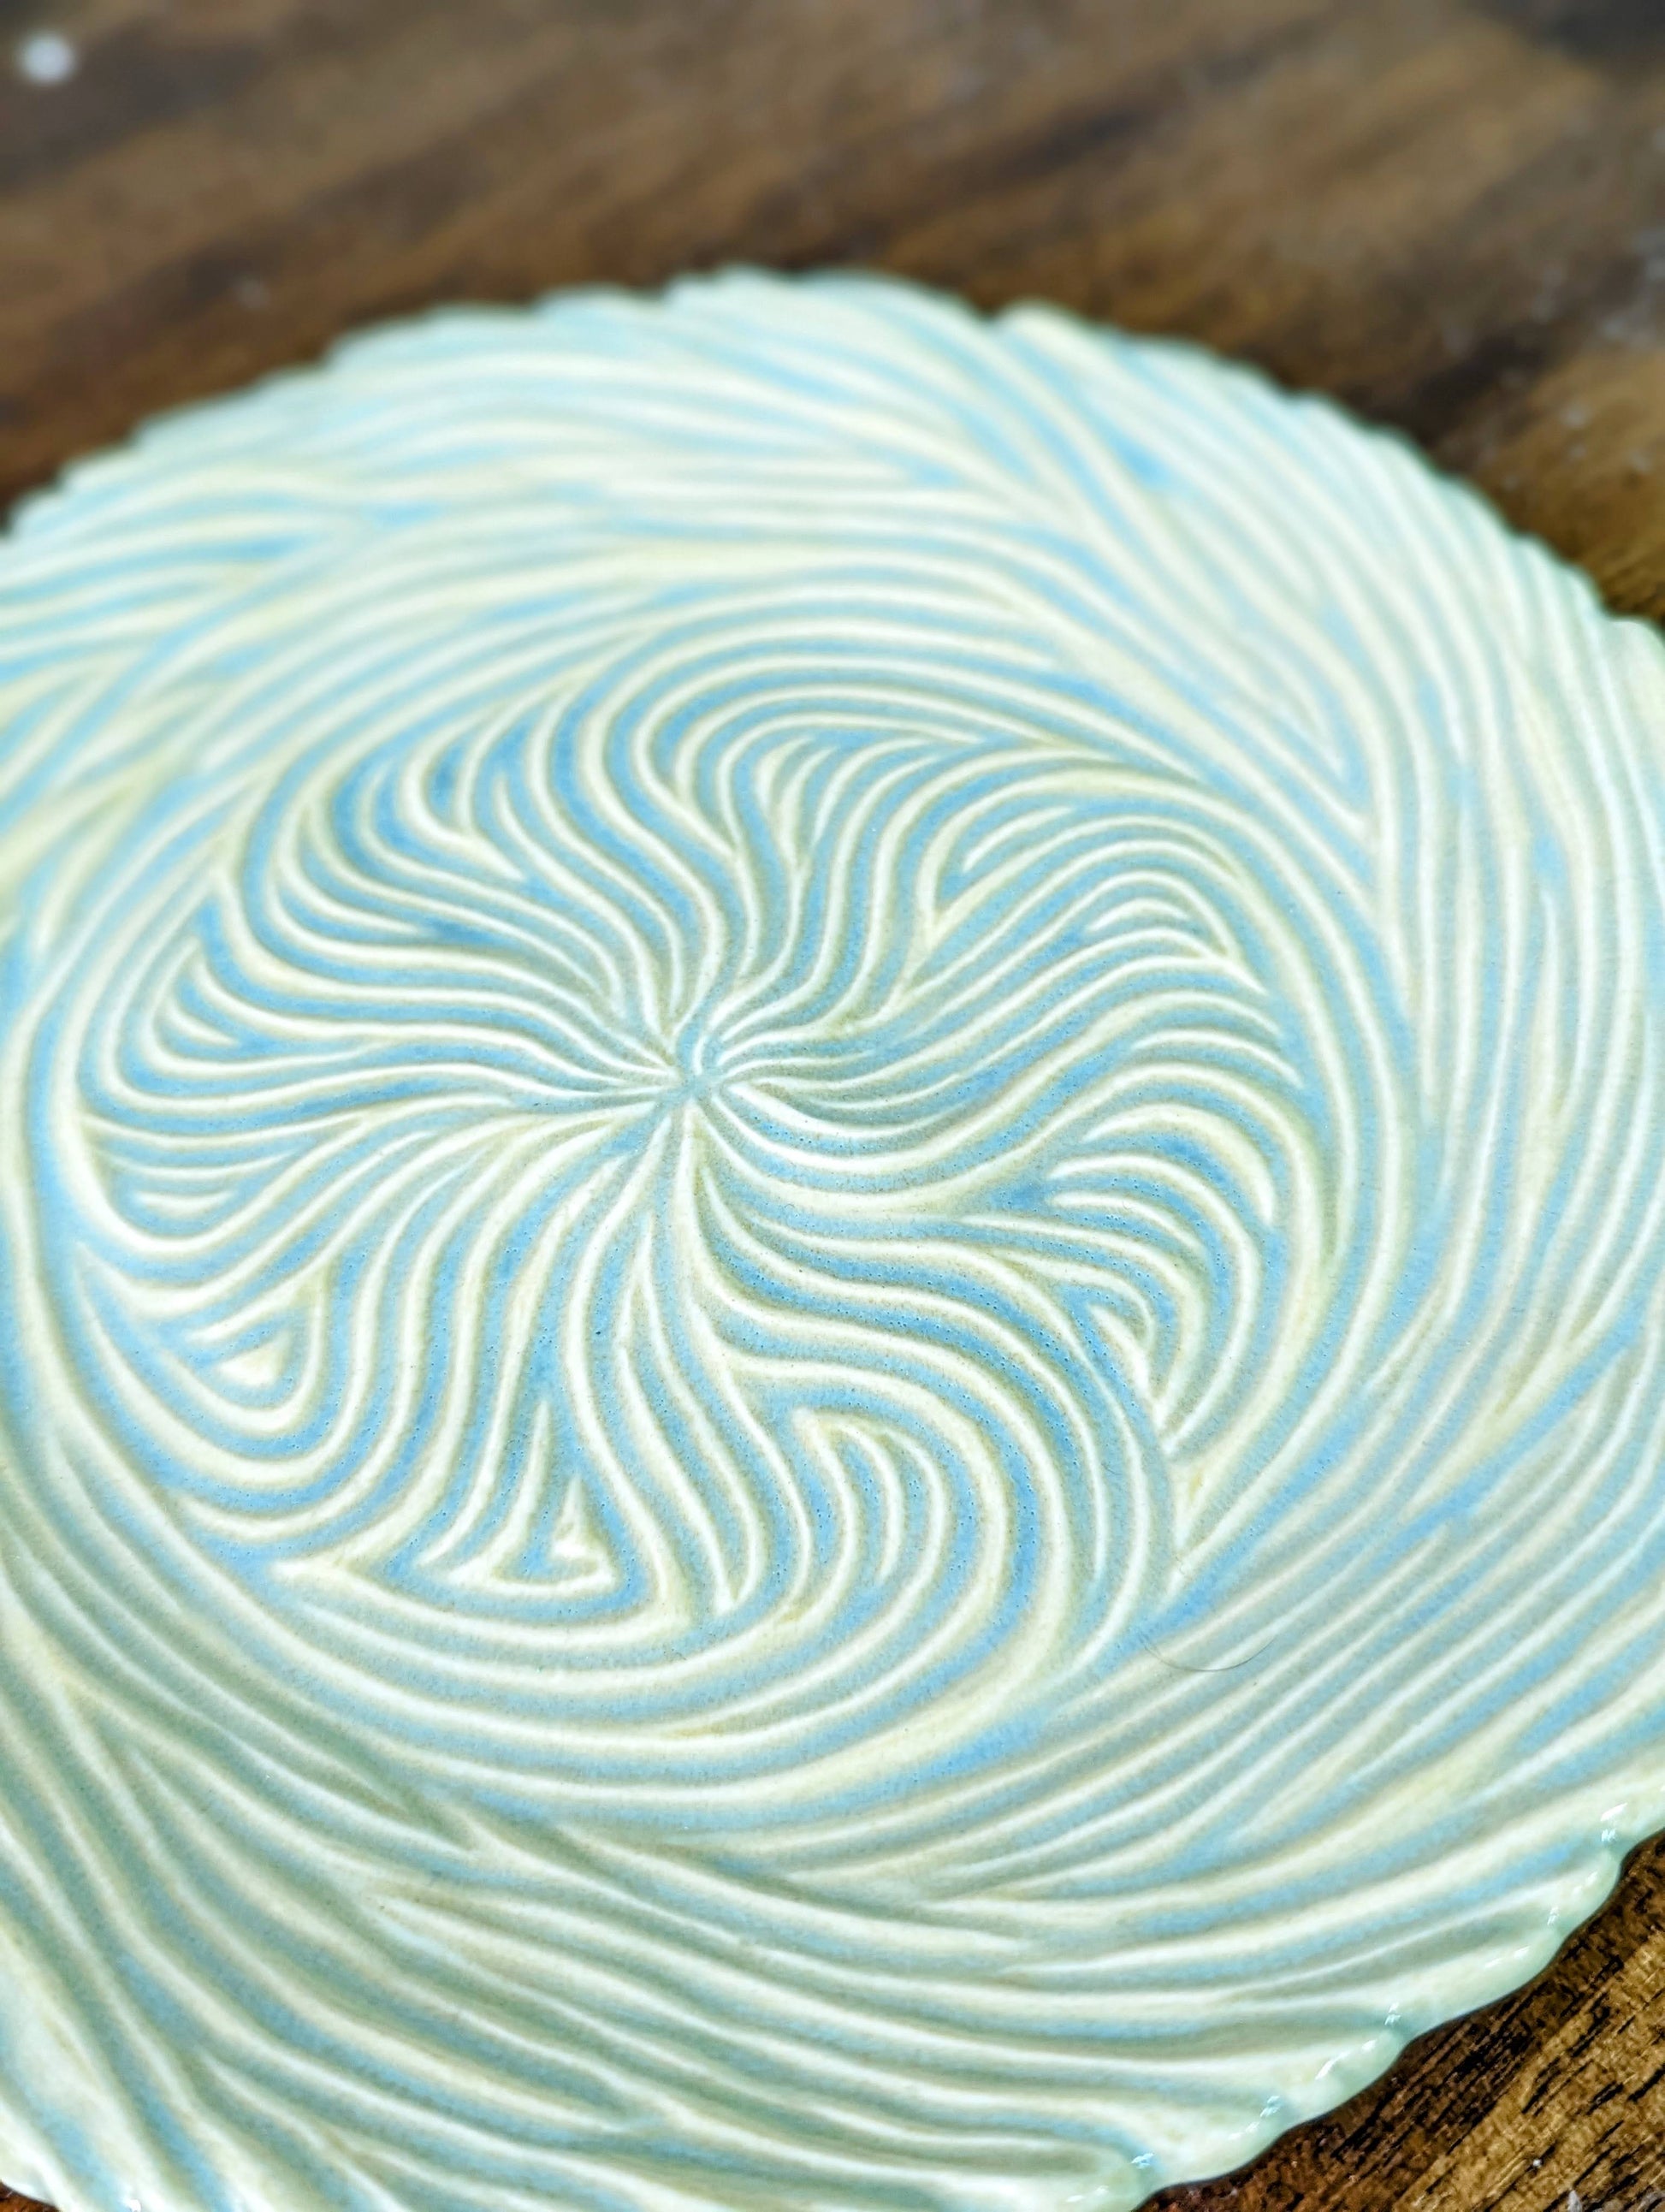 Celadon Swirls Portal Plate - Blue green that breaks to yellows at high points